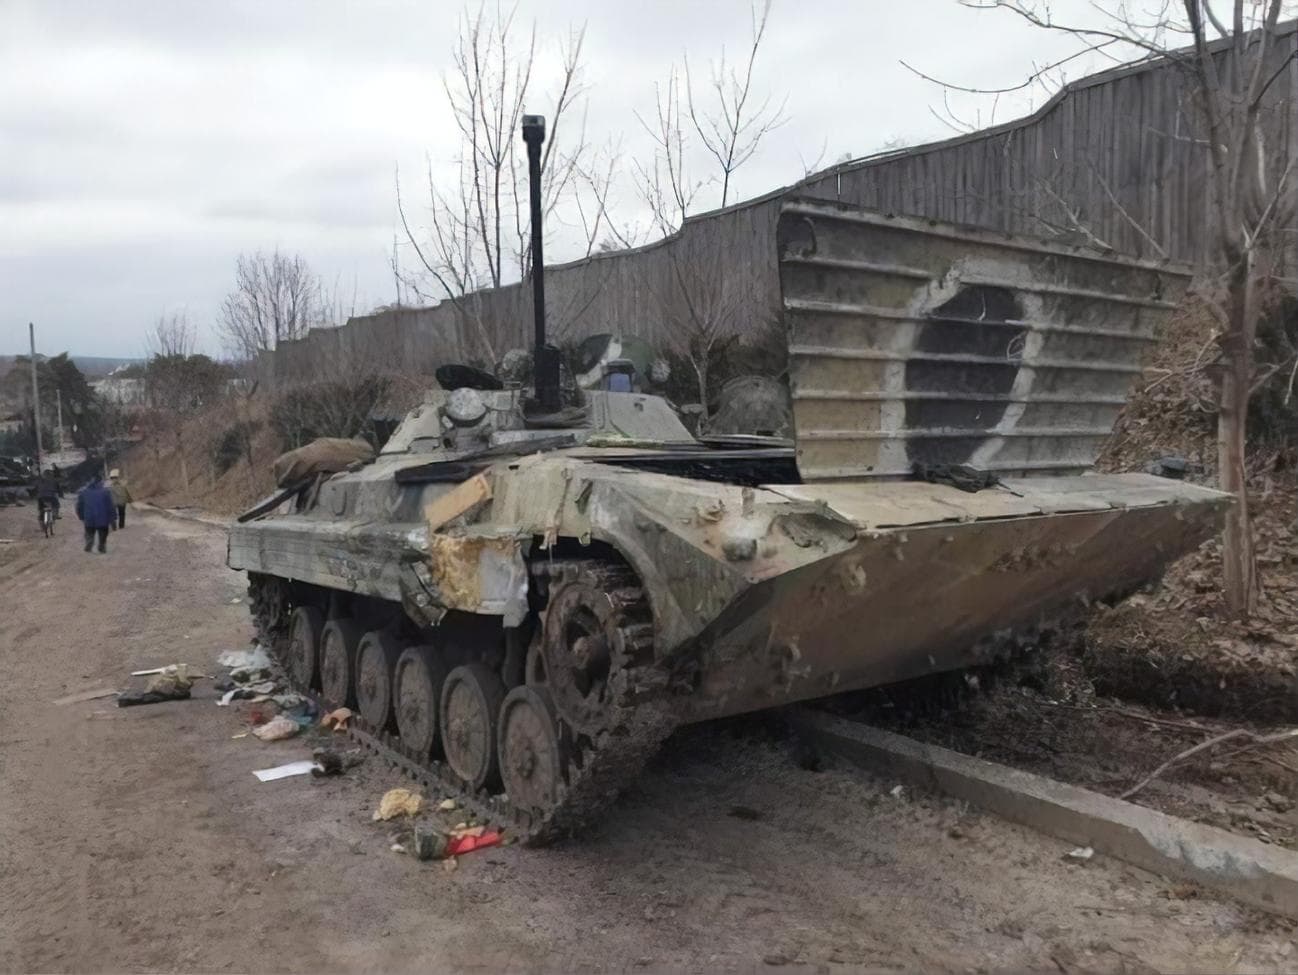 Abandoned and destroyed military equipment of the Kantemirovskaya division near the town of Trostyanets